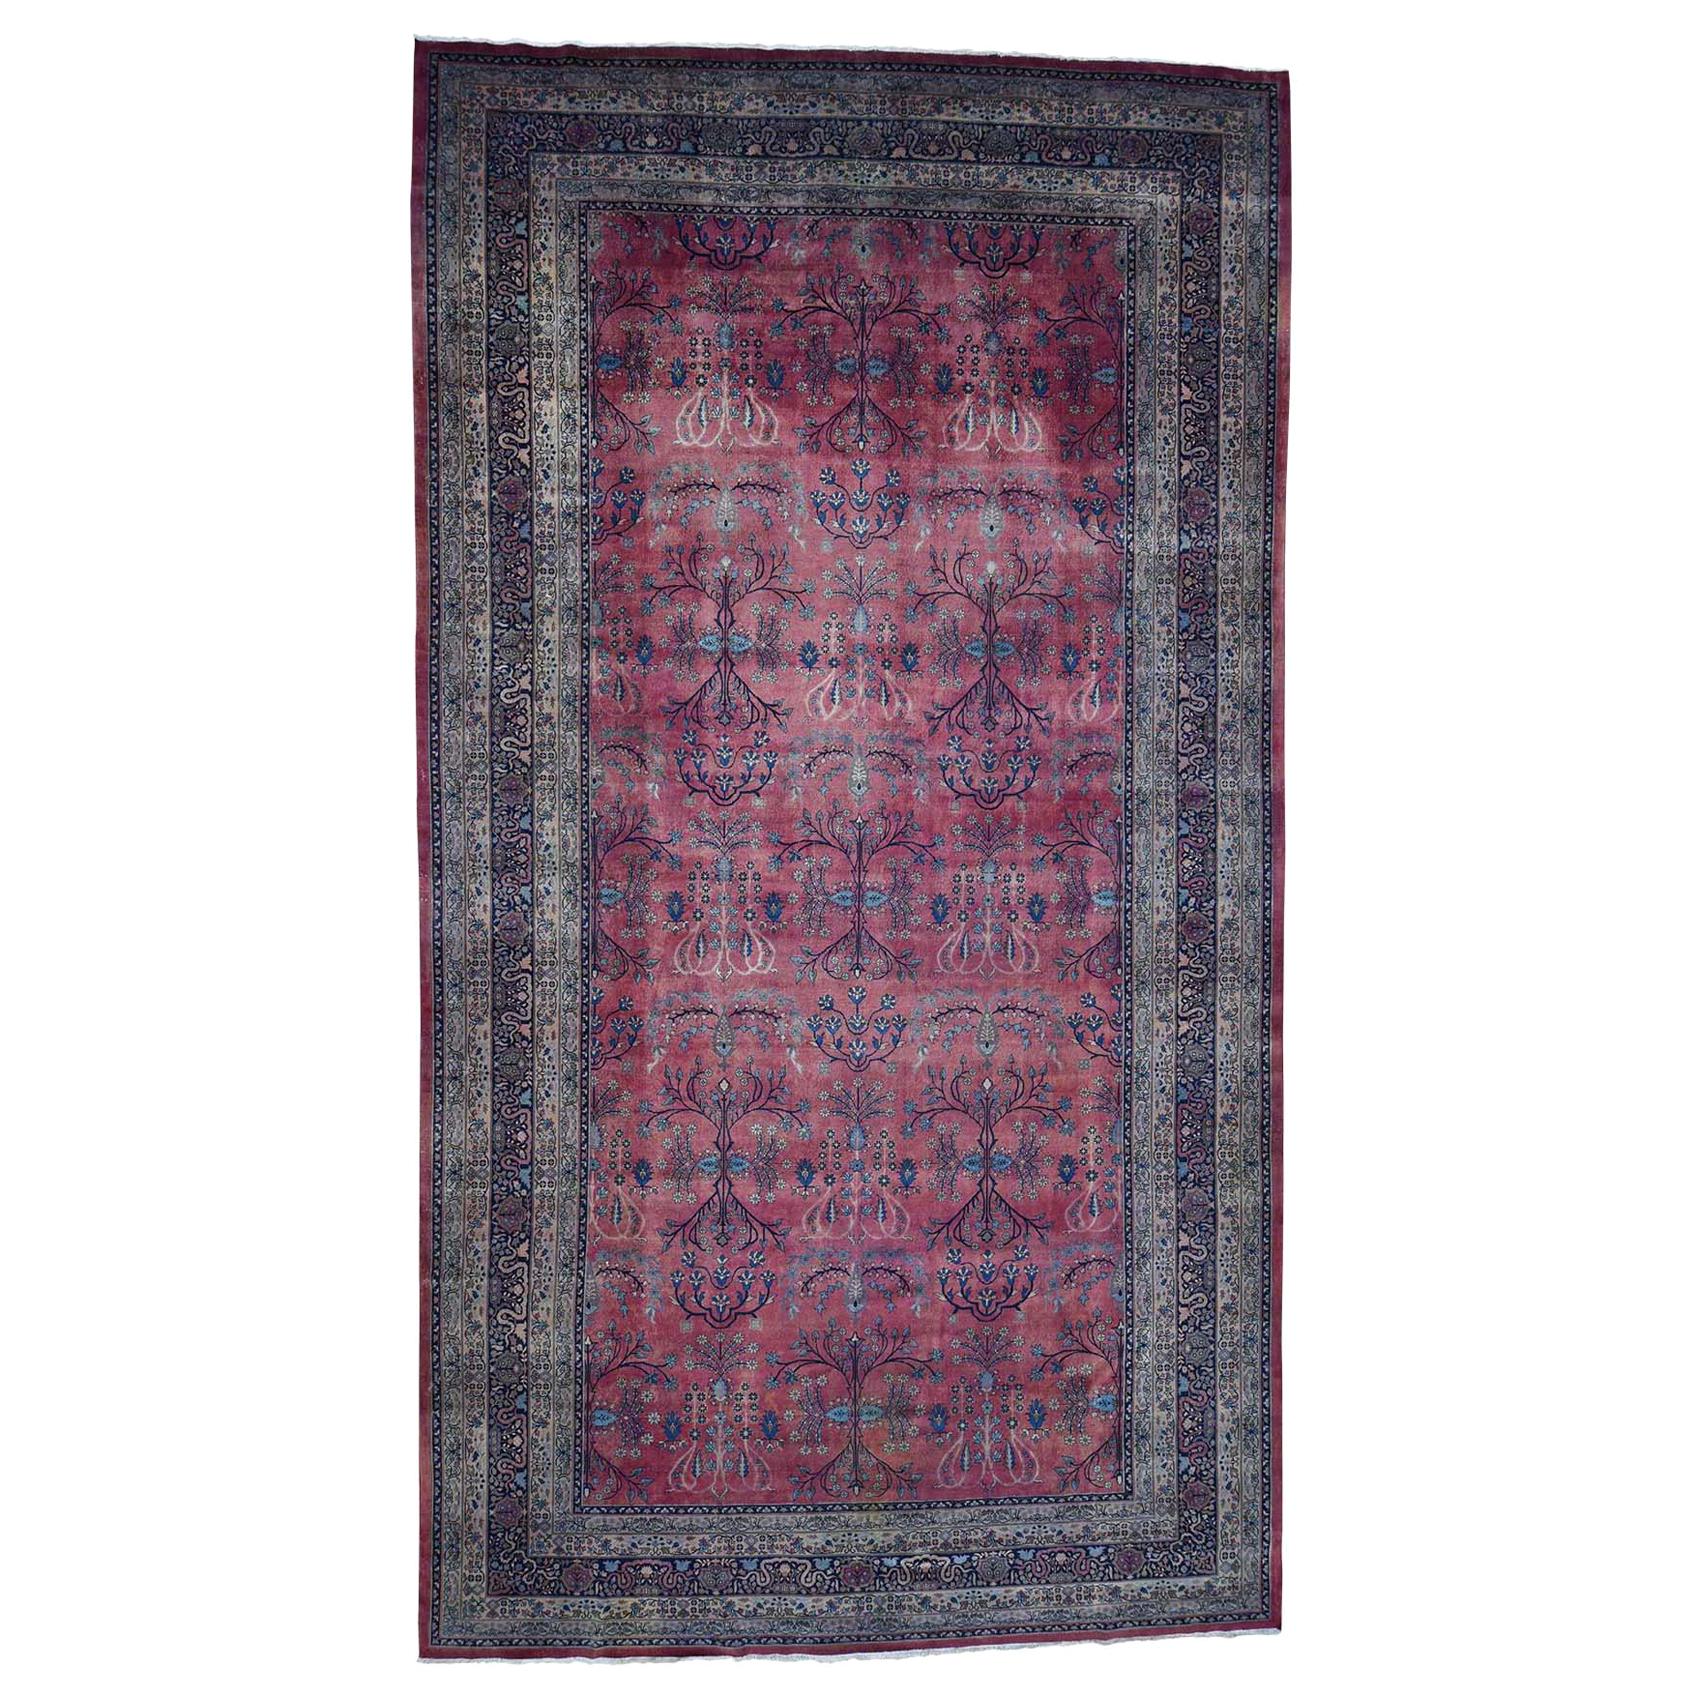 1900 Antique Persian Kashan Rug, Gallery Size, Light Reds